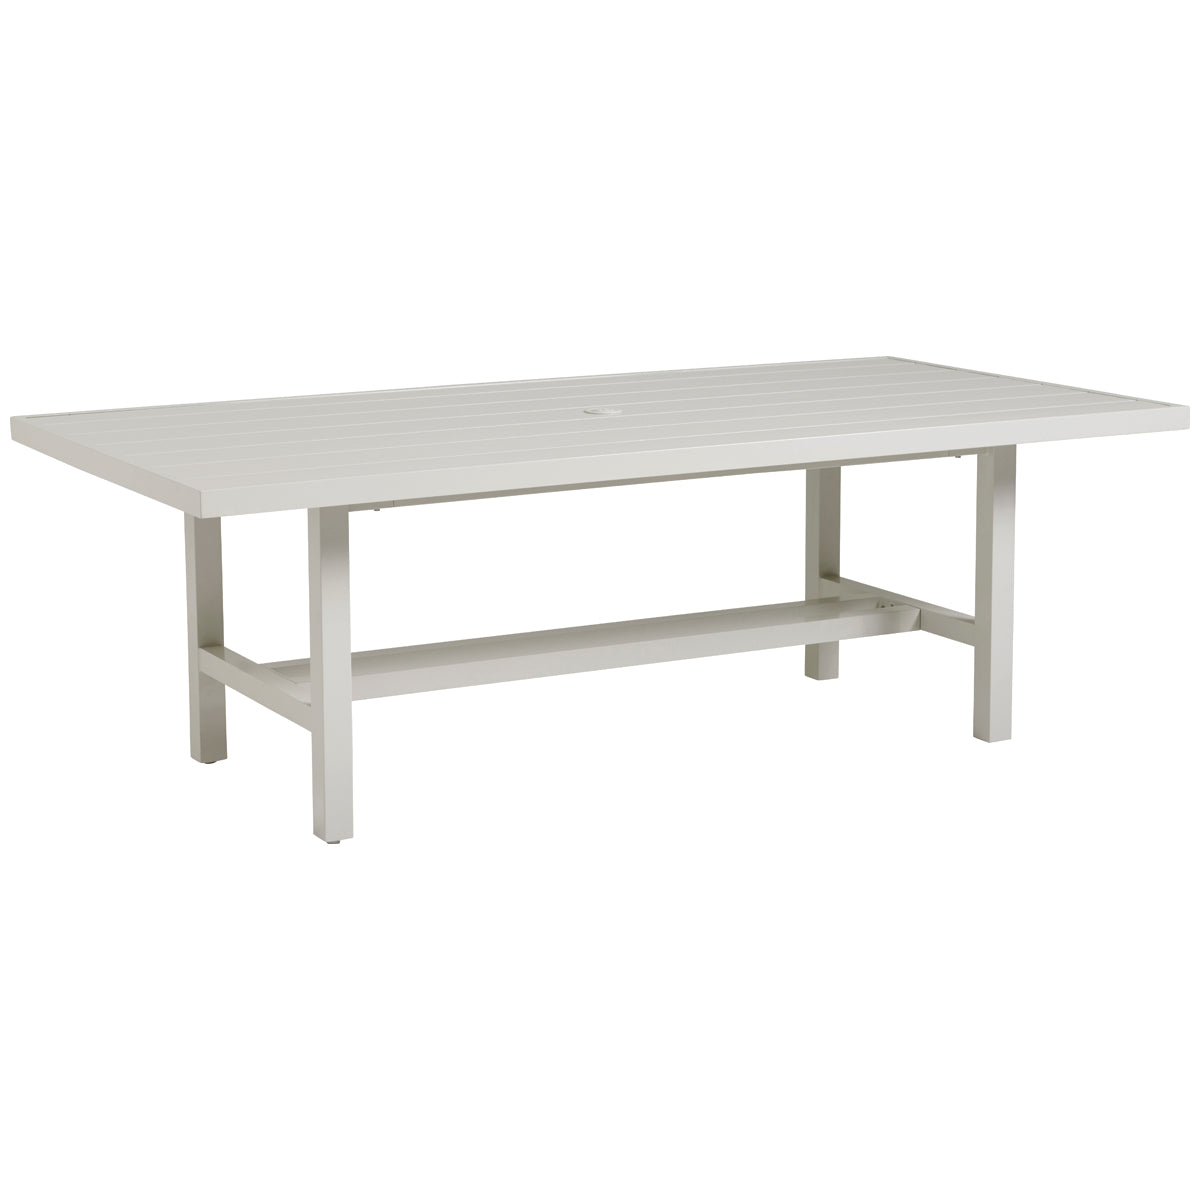 Tommy Bahama Seabrook Outdoor Rectangular Dining Table